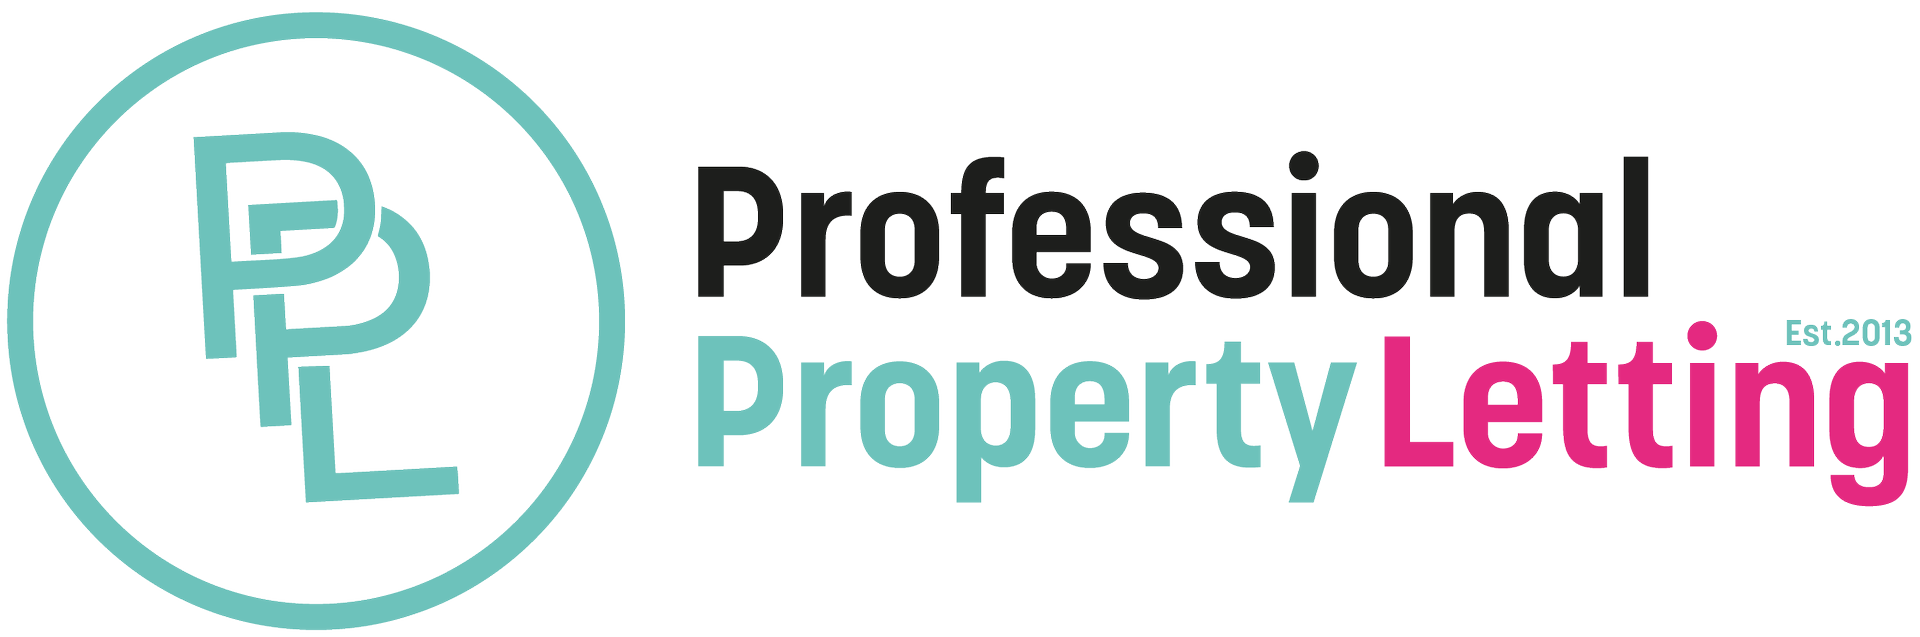 Professional Property Lettings